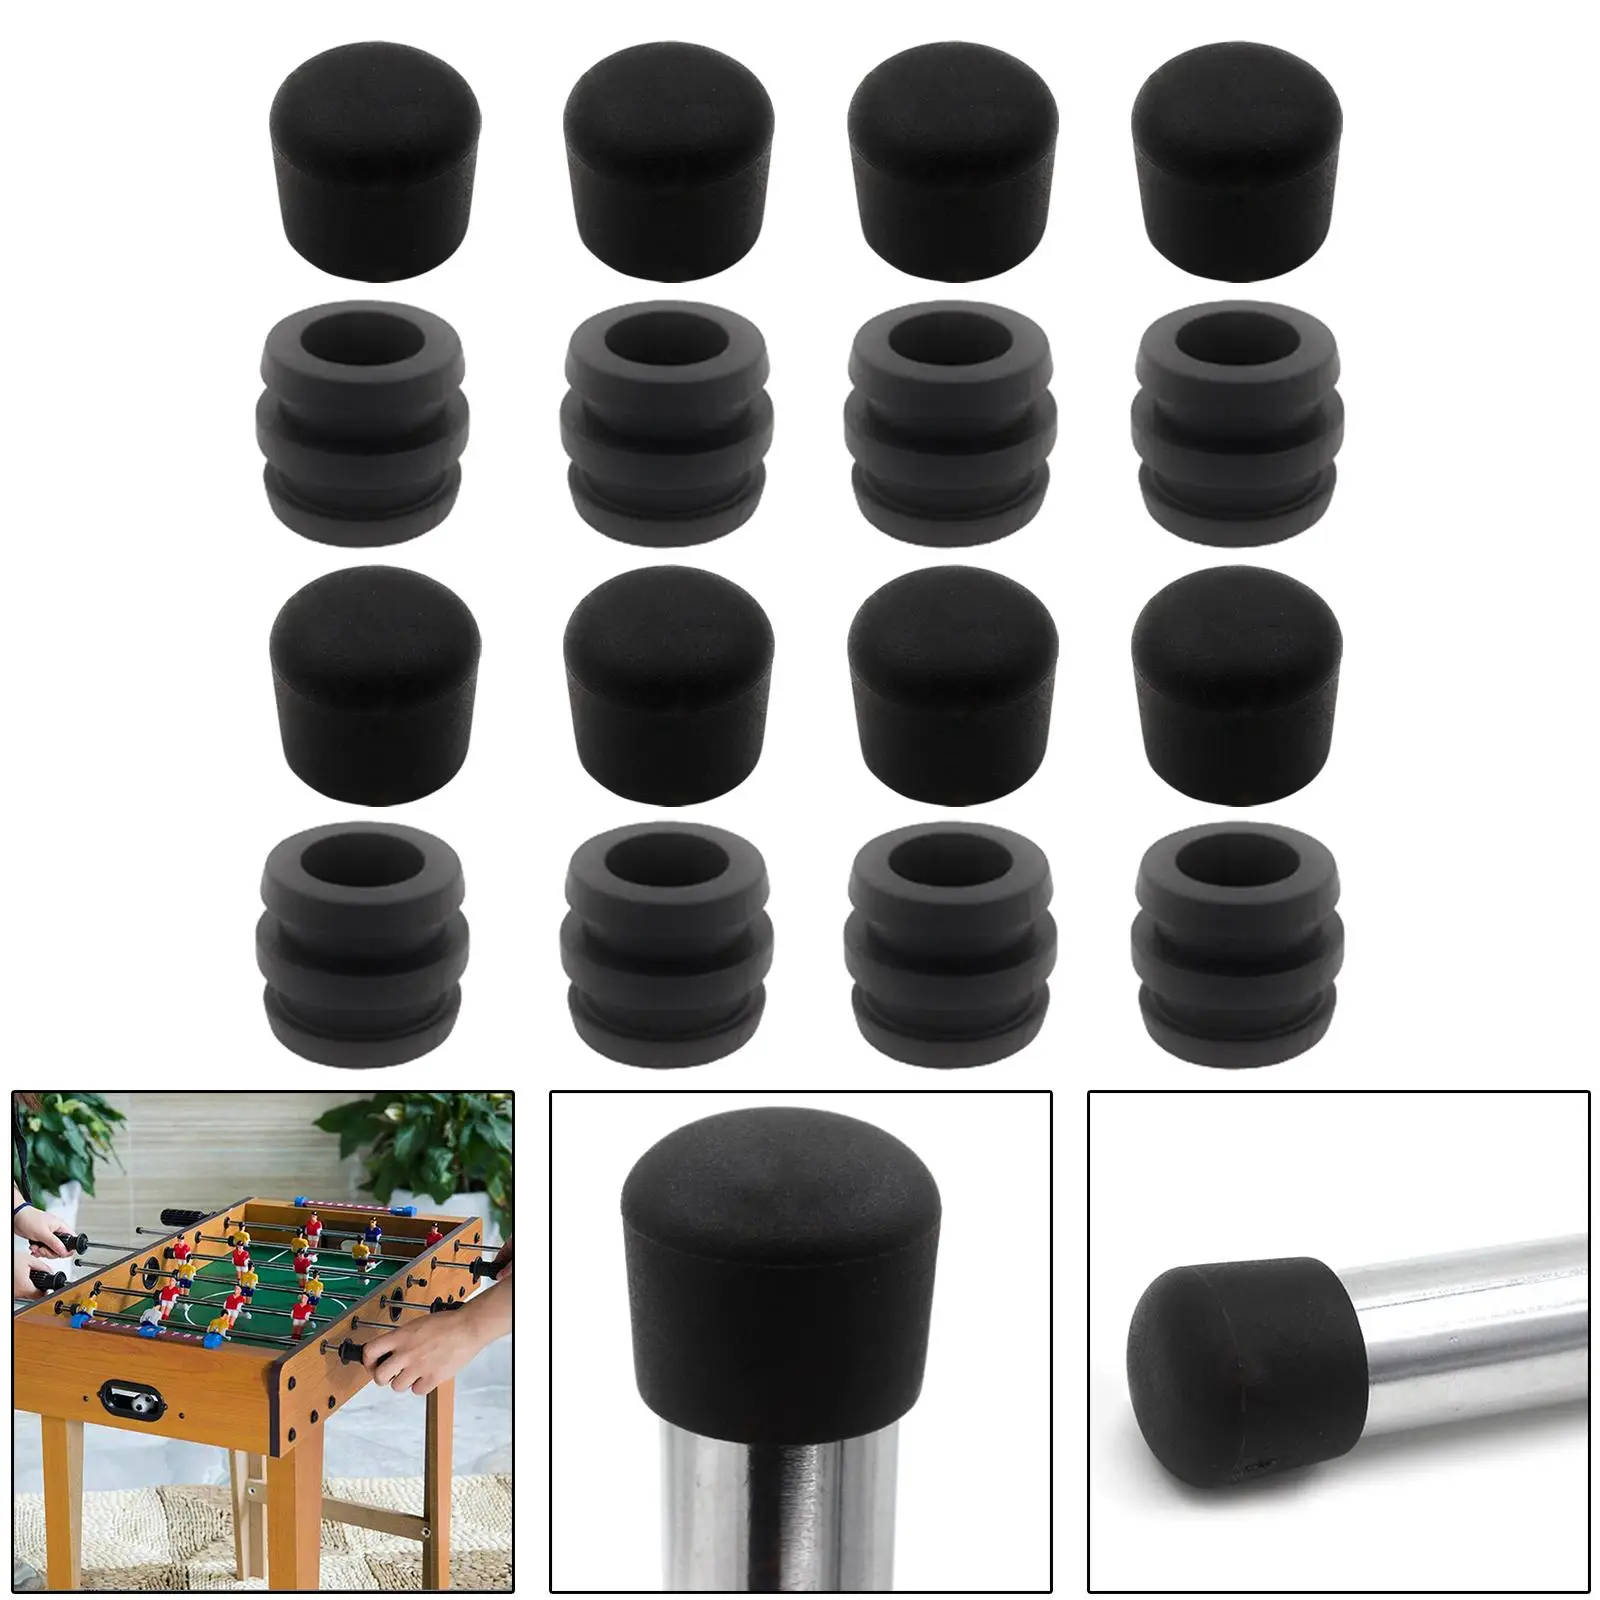 Rod Bumpers End Caps Accessories, Foosball Ball Replacement, Fussball Standard